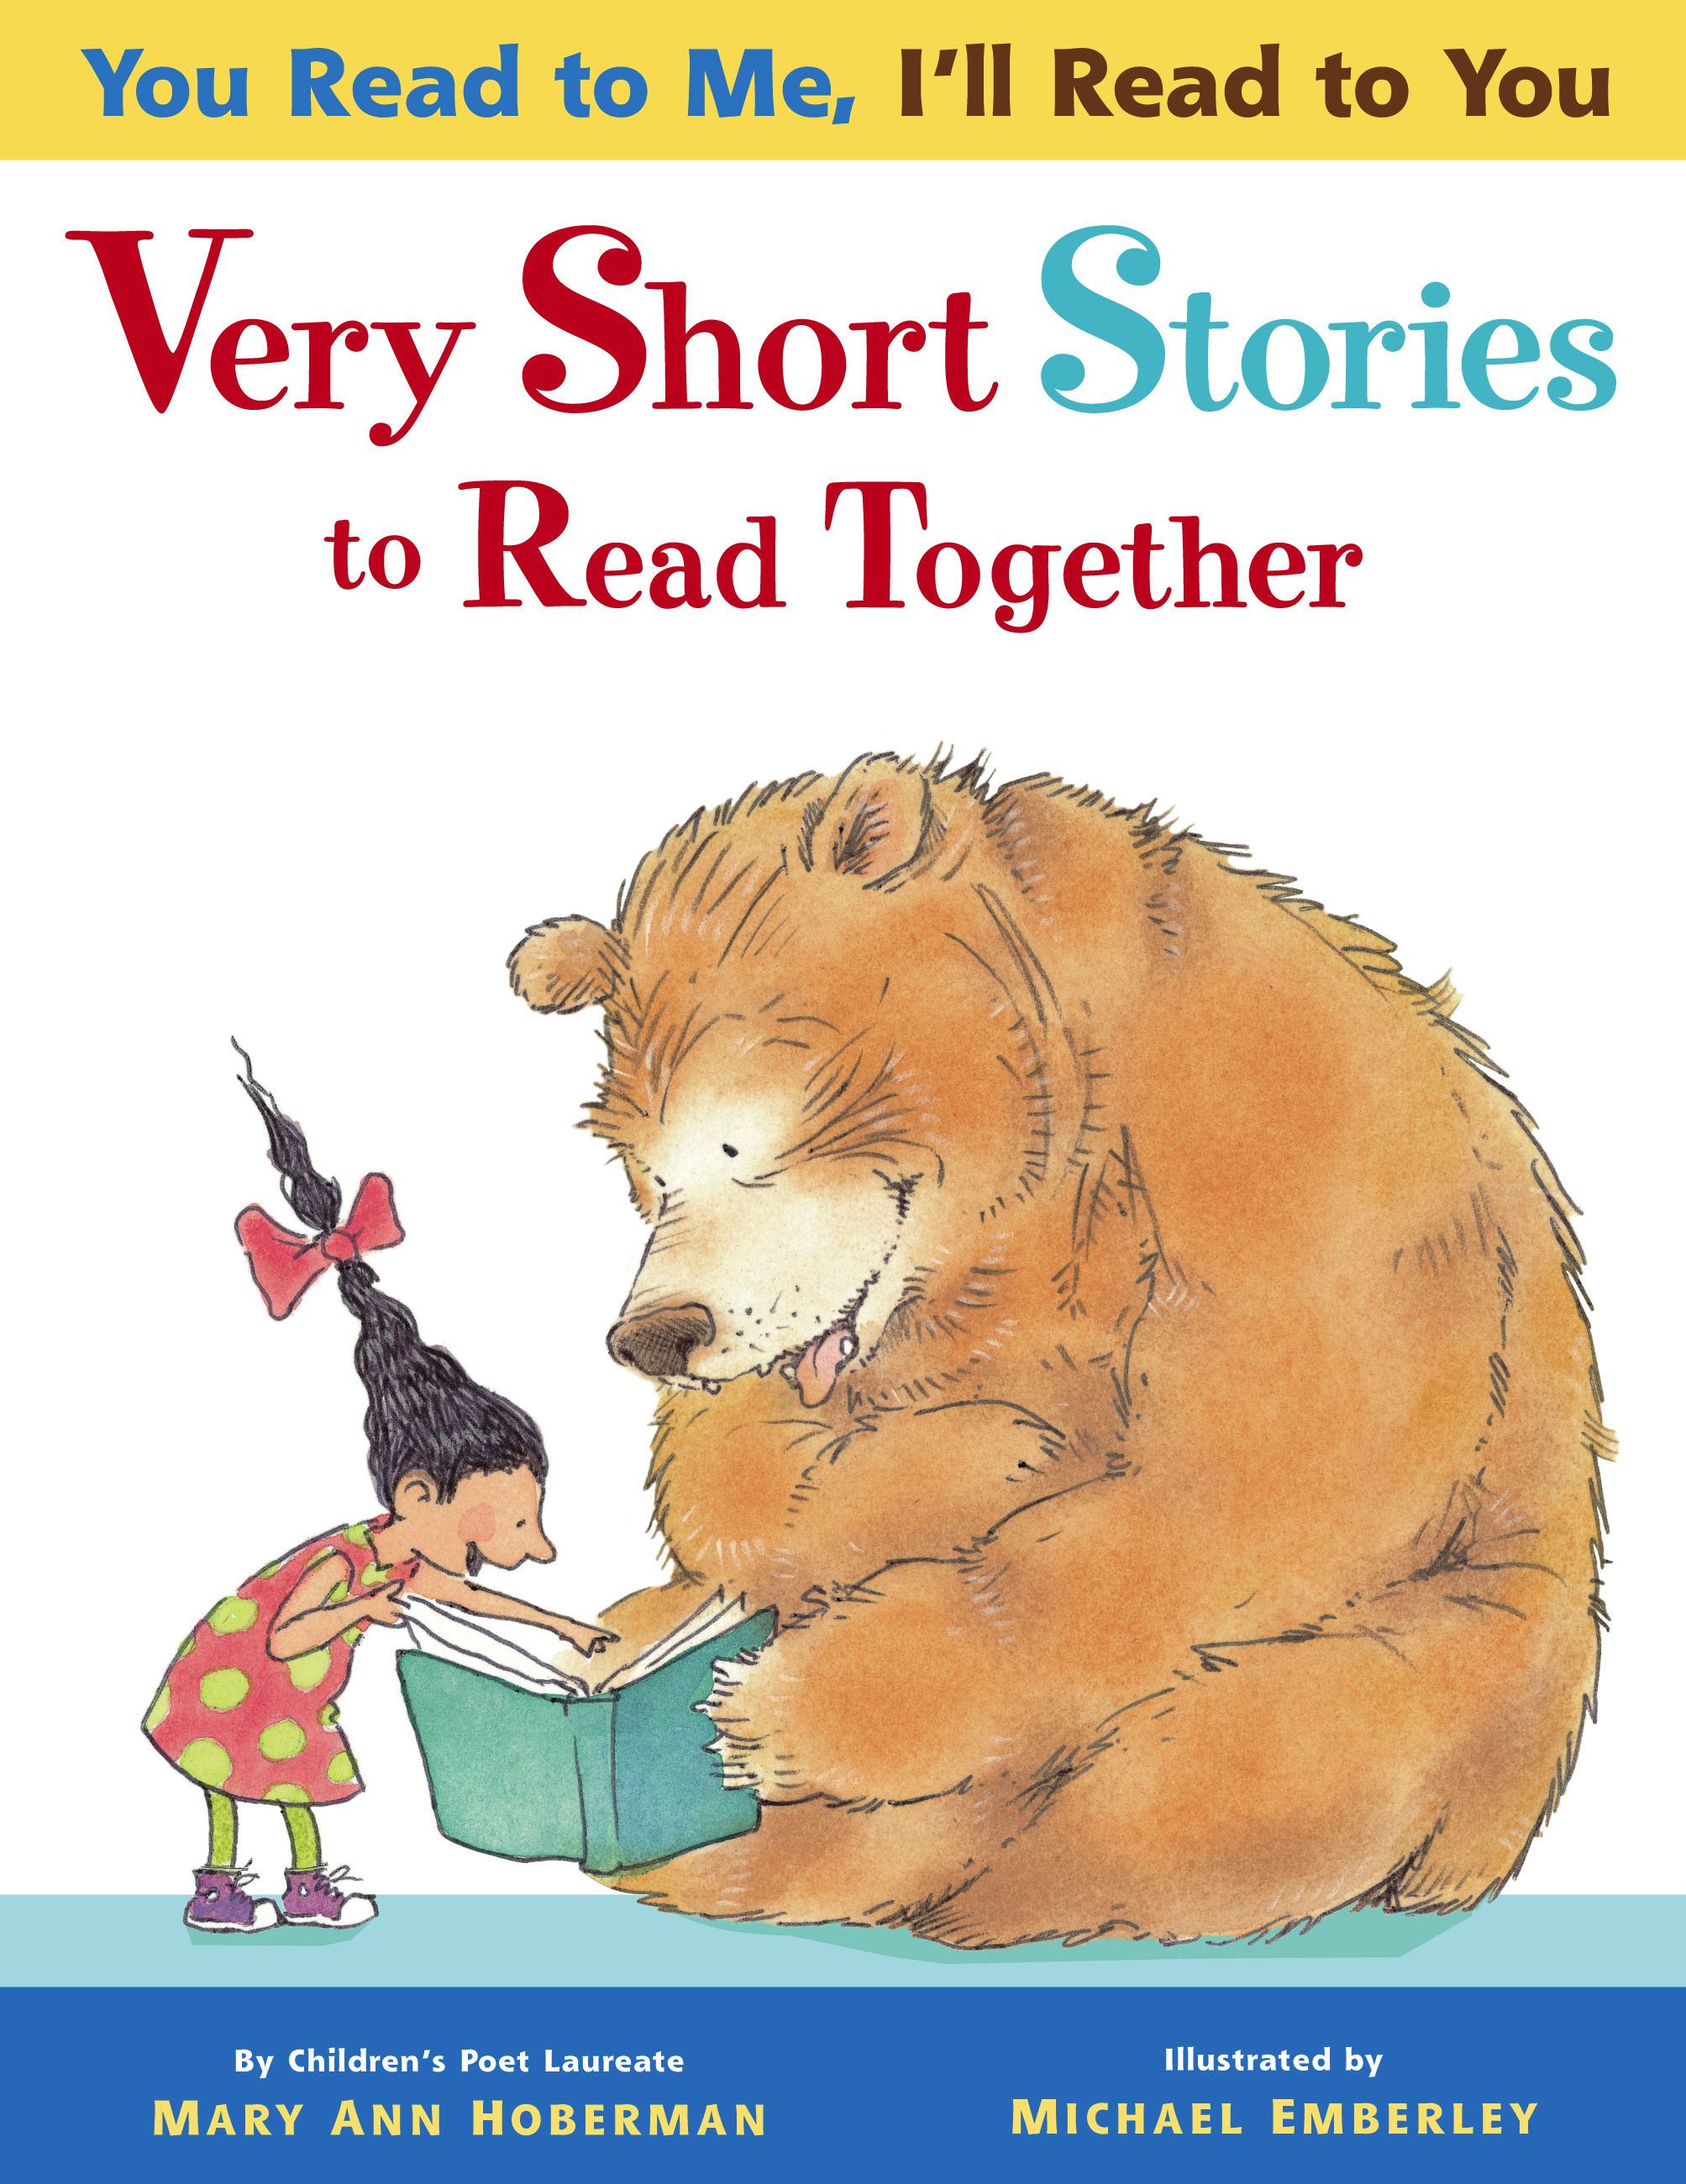 Very Short Stories to Read Together by Mary Ann Hoberman | Little, Brown  Books for Young Readers